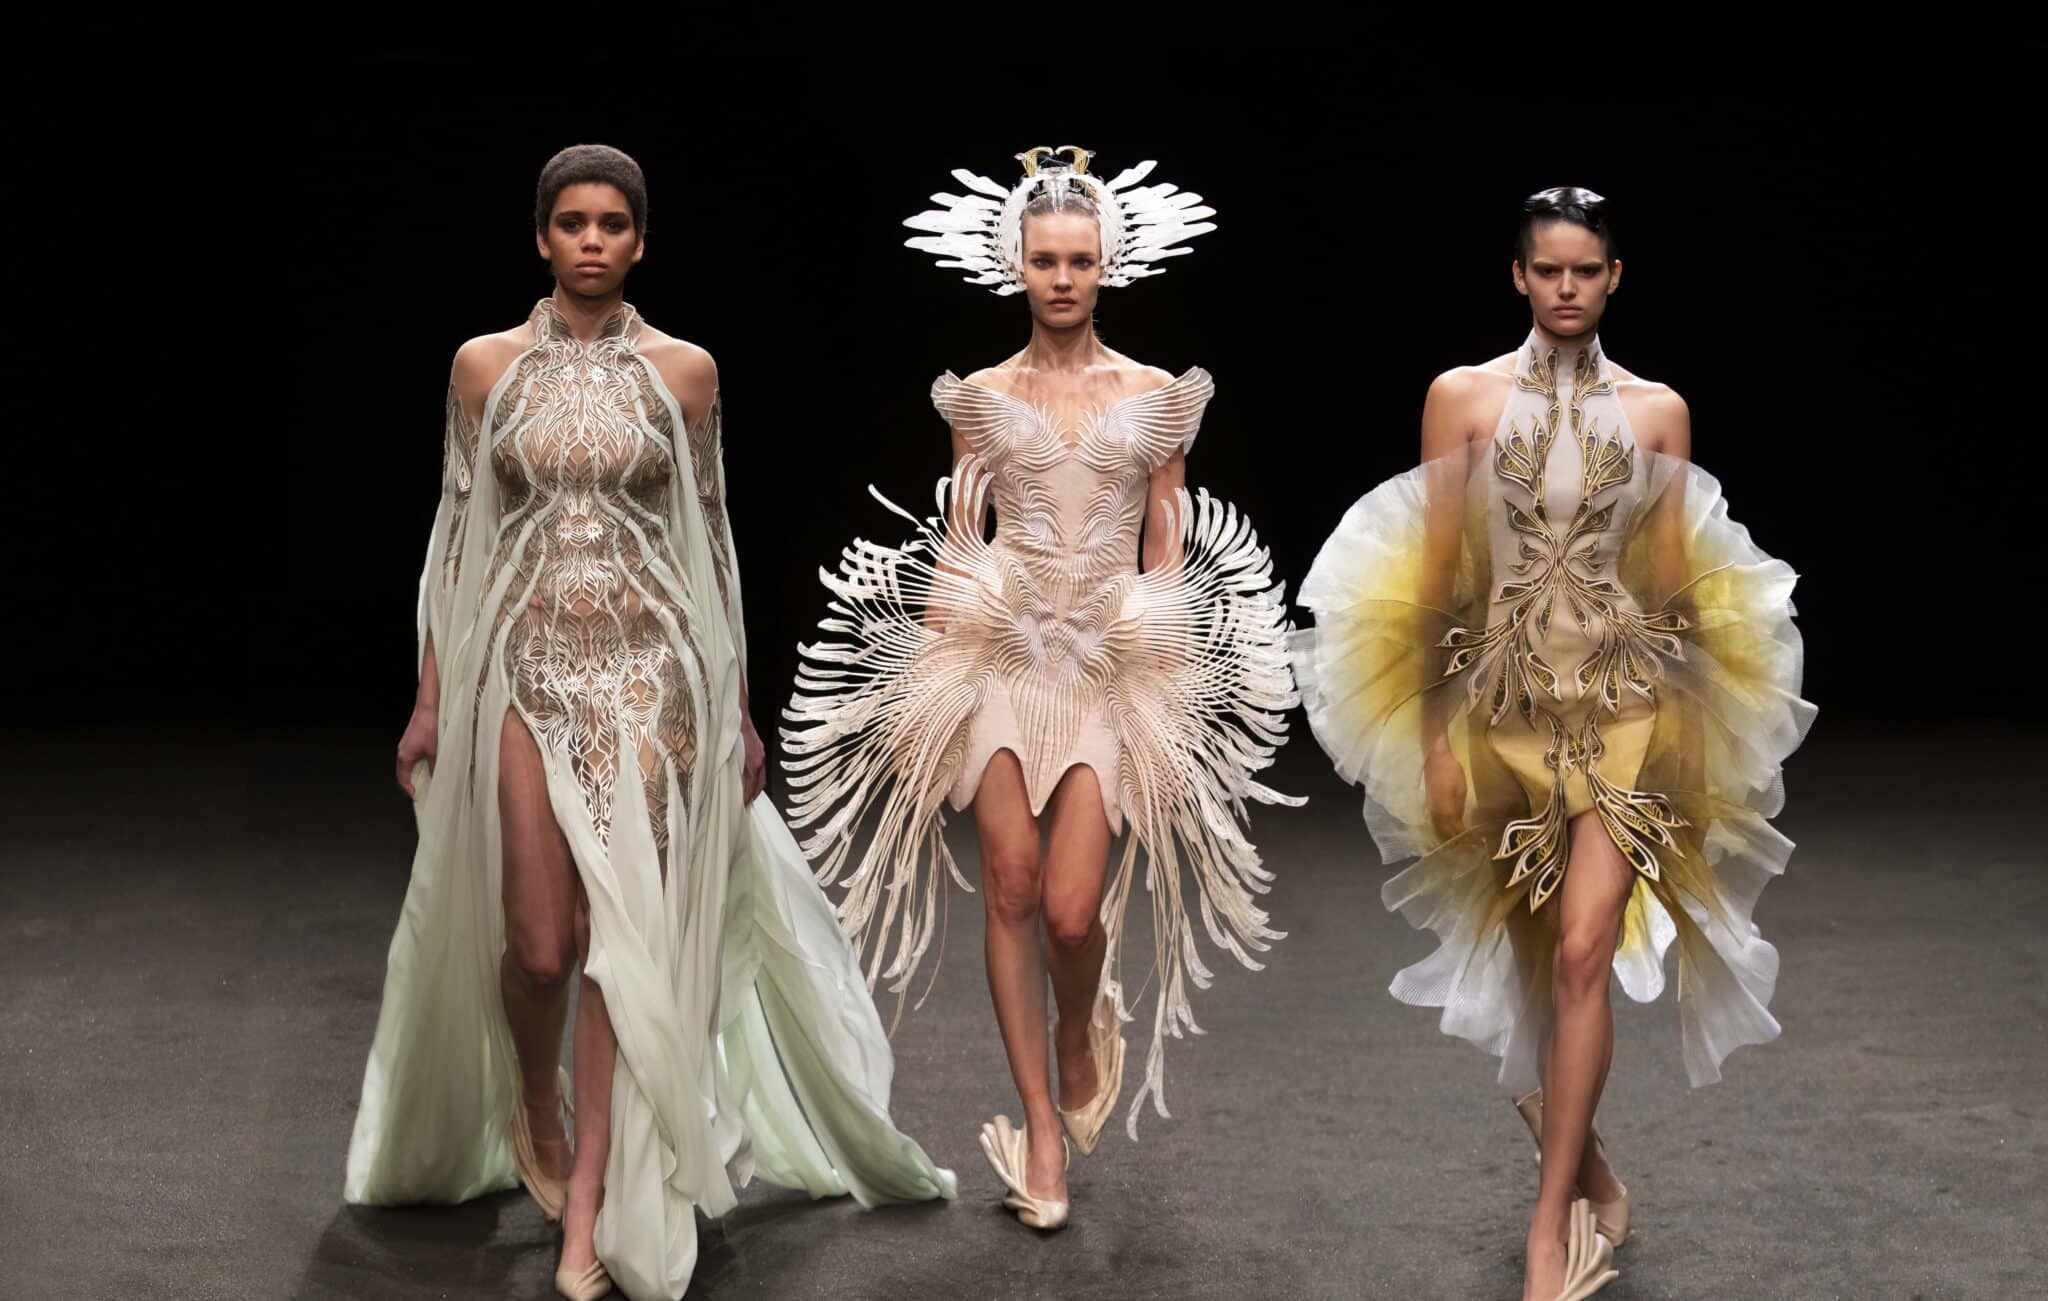 PARIS FASHION WEEK HAUTE COUTURE 2021, WHAT TO EXPECT - MASTERS EXPO